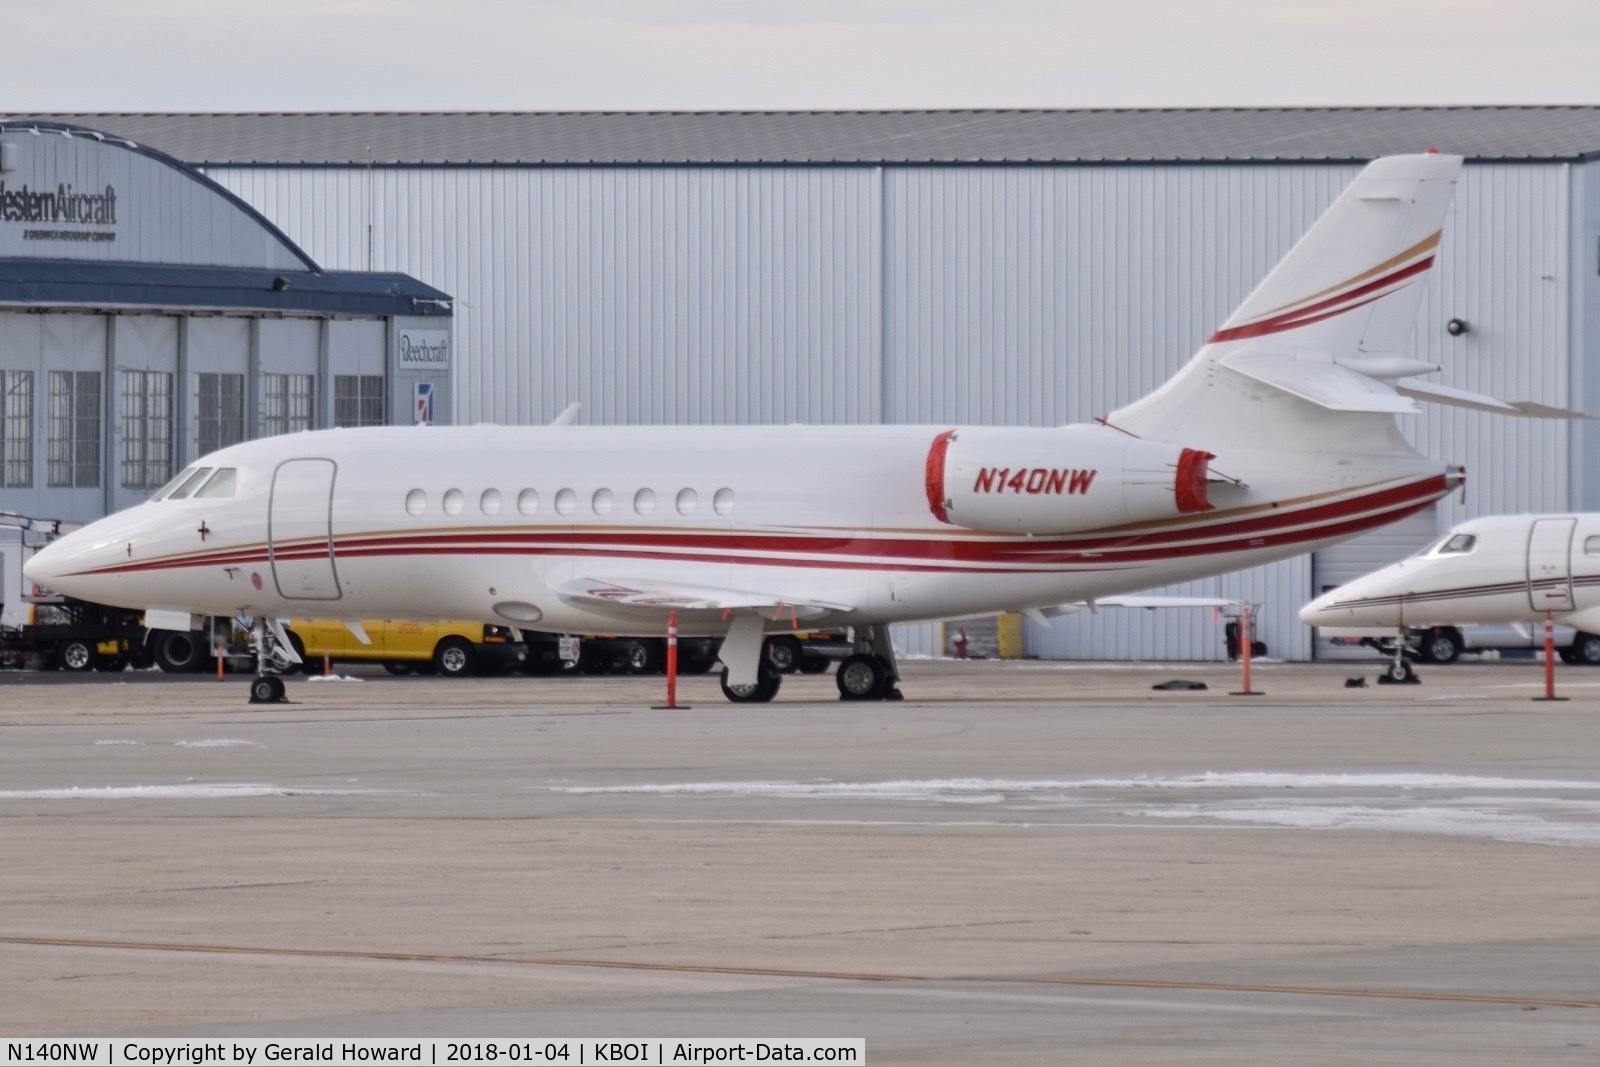 N140NW, 2005 Dassault Falcon 2000 C/N 224, Parked on south GA ramp.